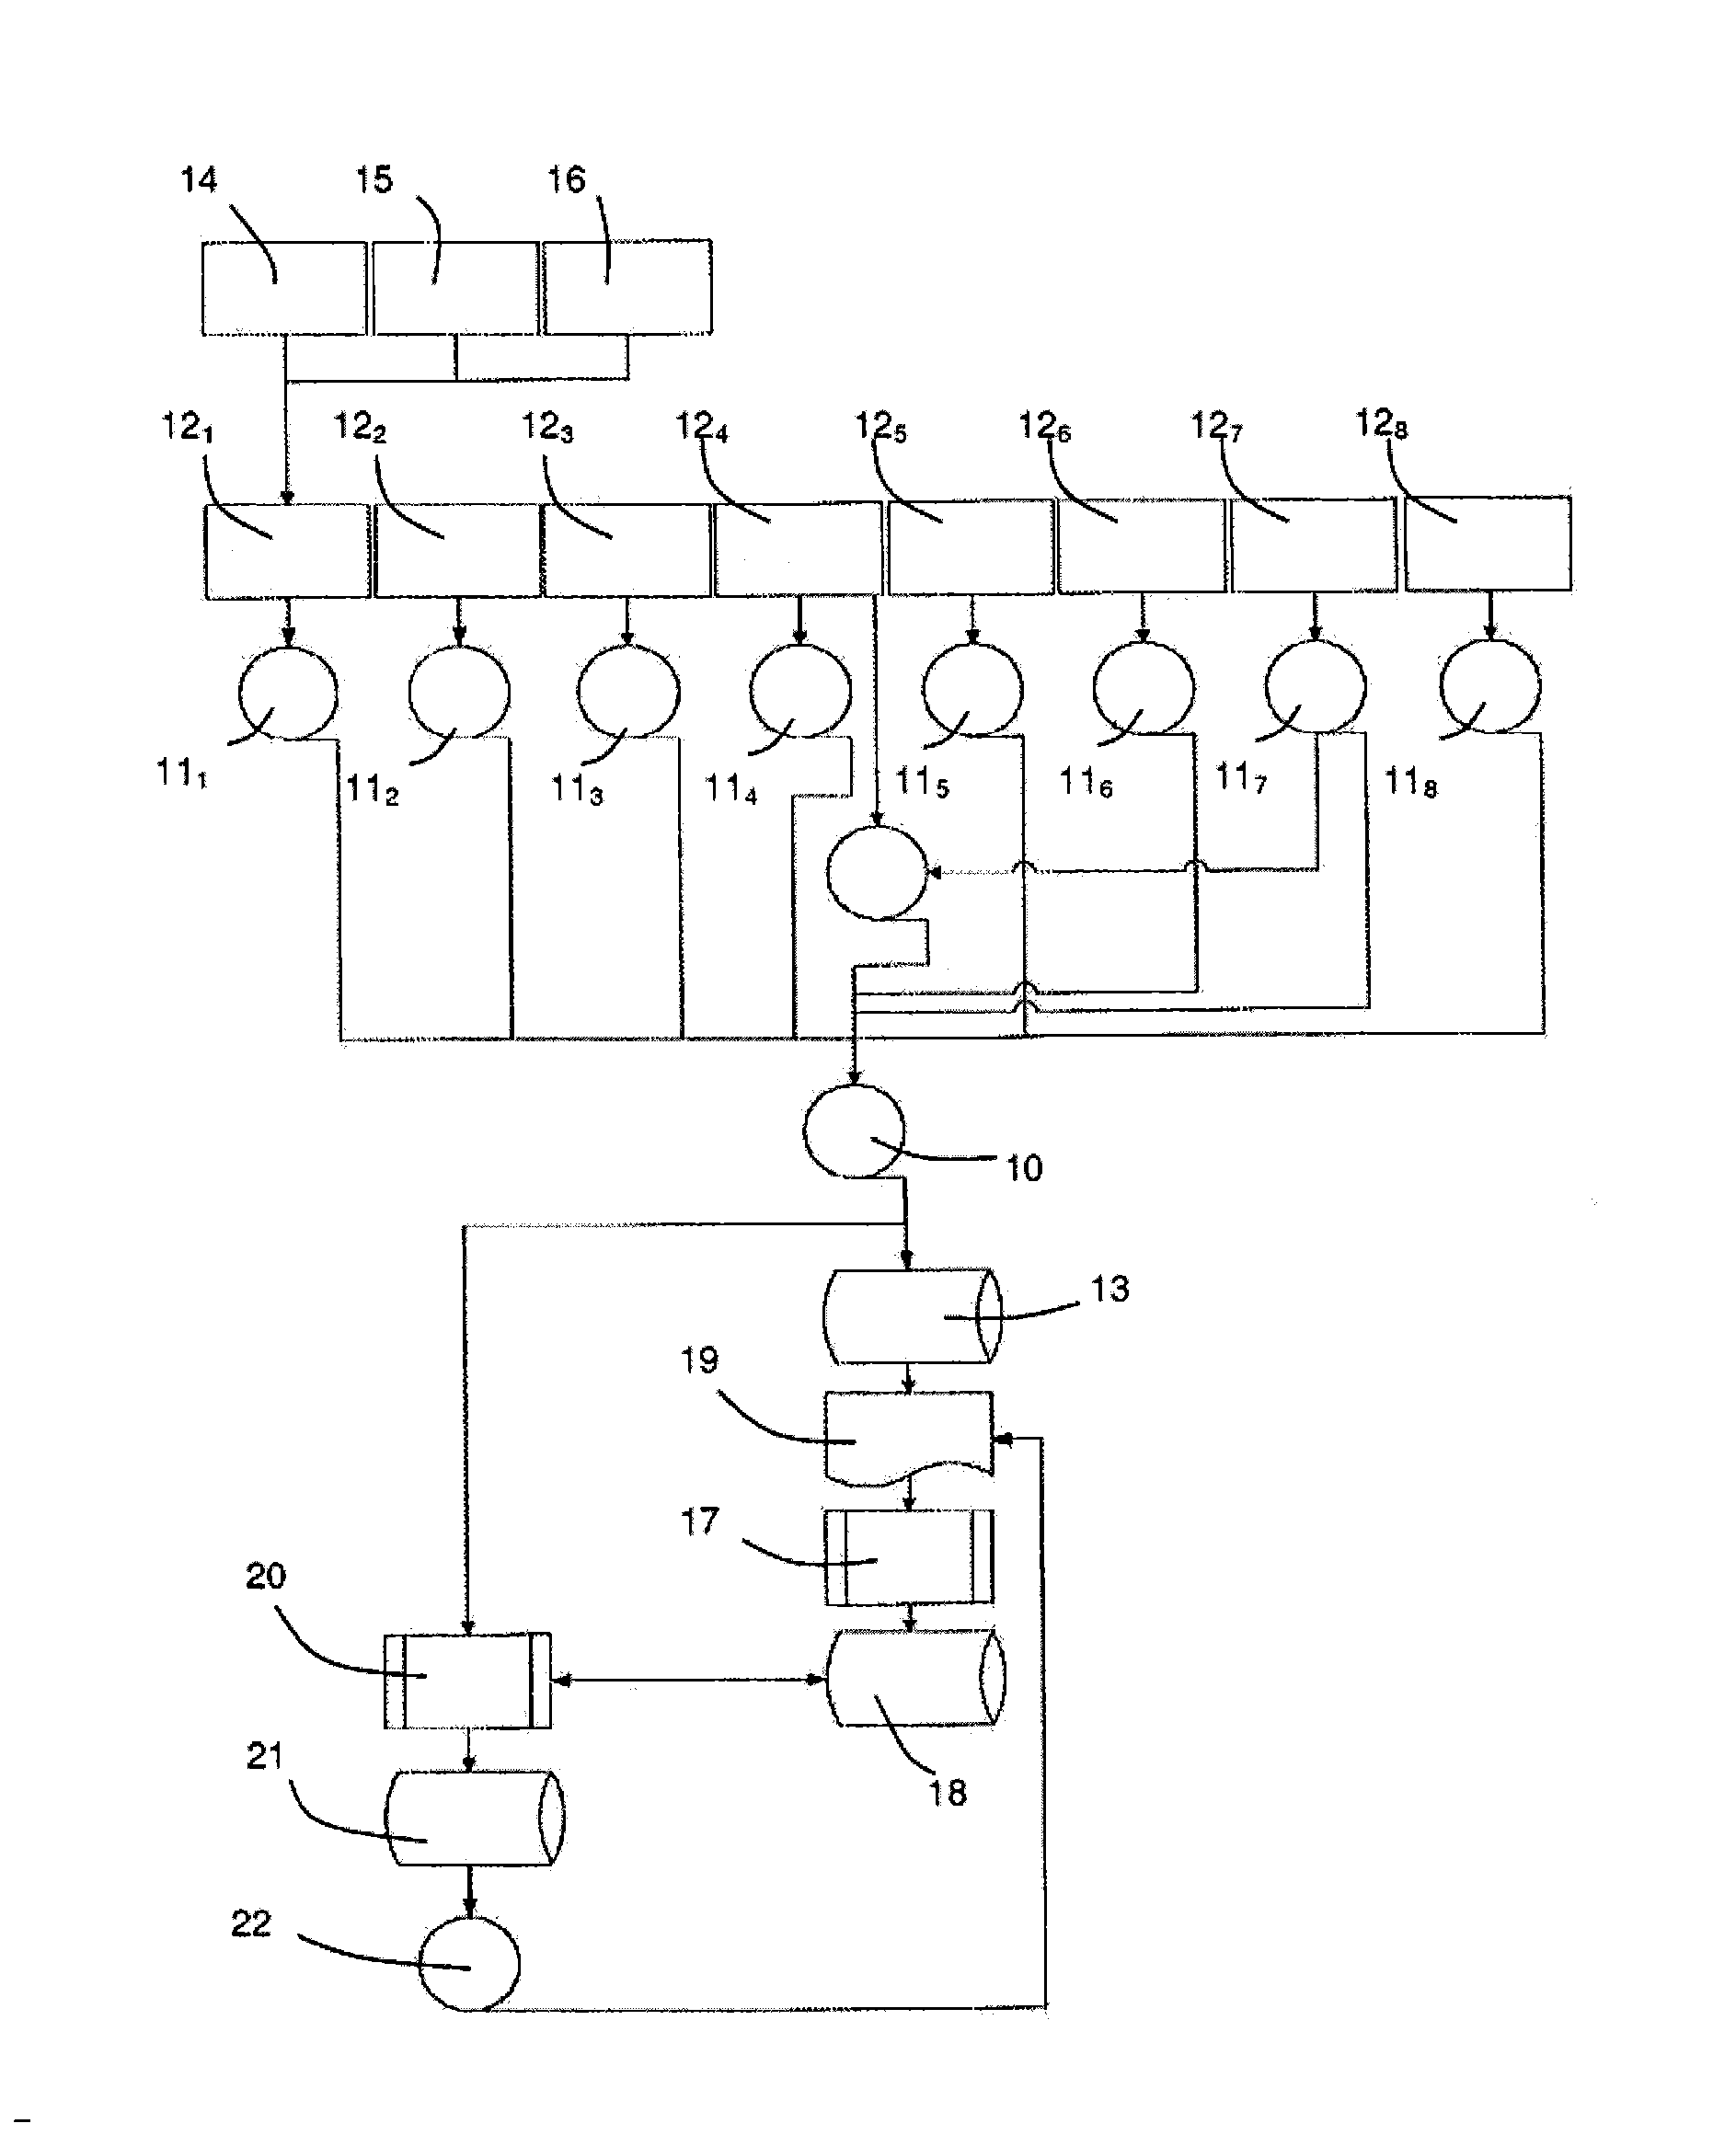 Method for assisting a user of a motor vehicle, multimedia system, and motor vehicle